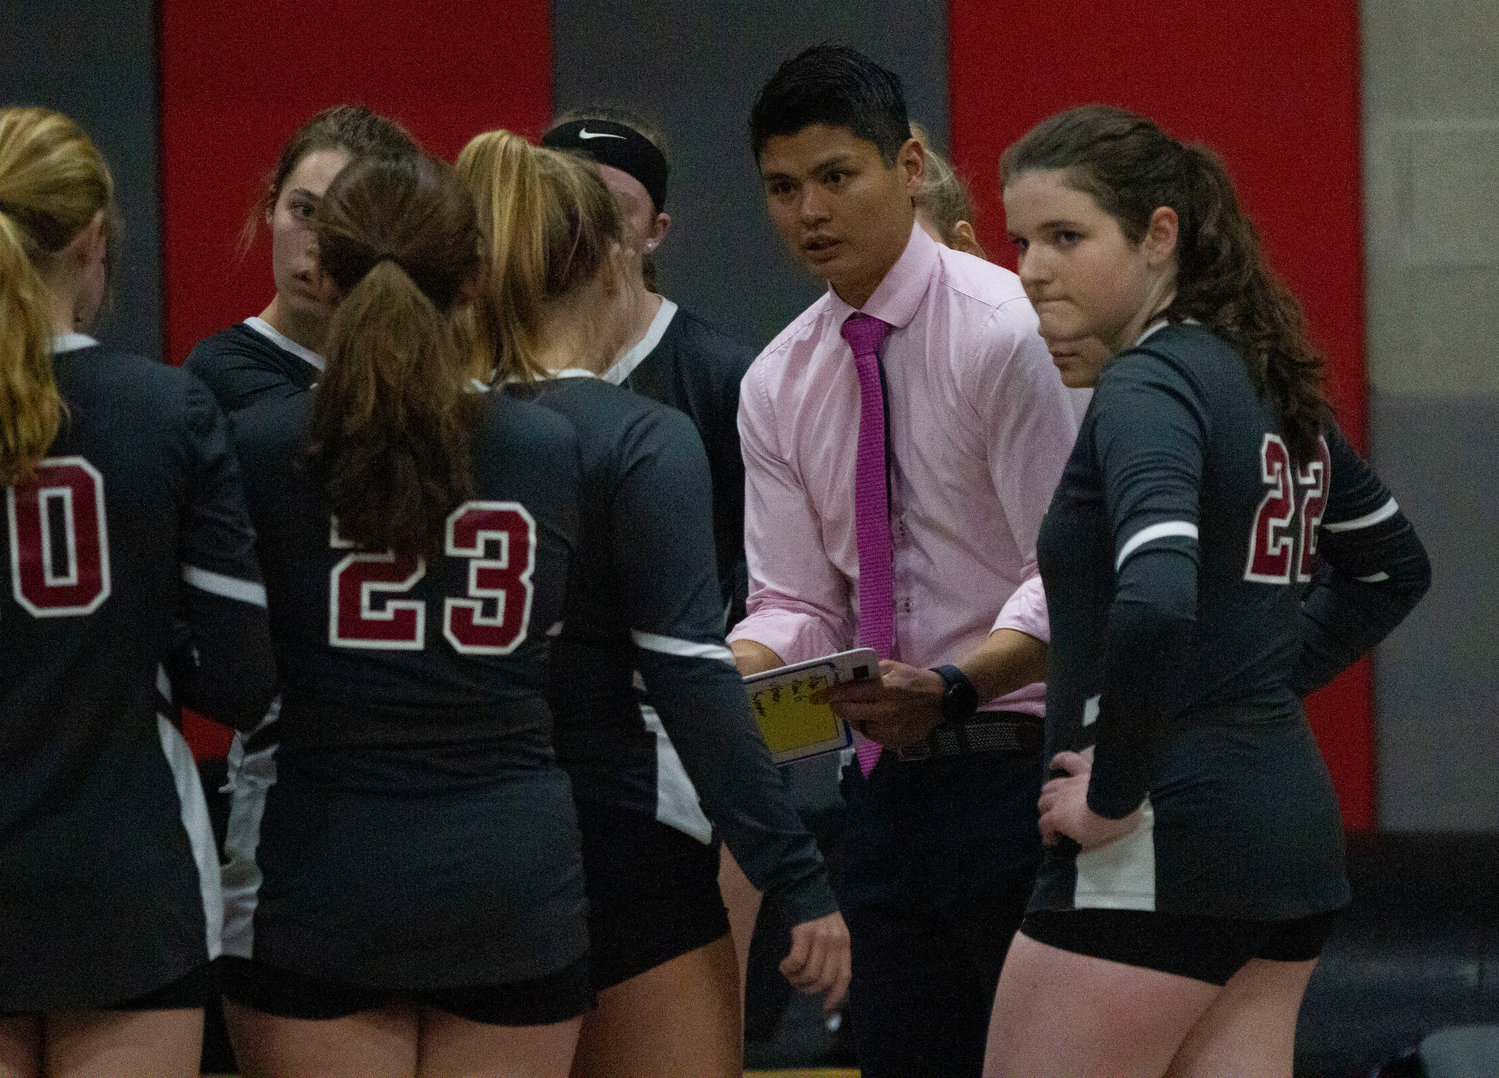 Head coach John Huynh speaks to the team during a timeout.